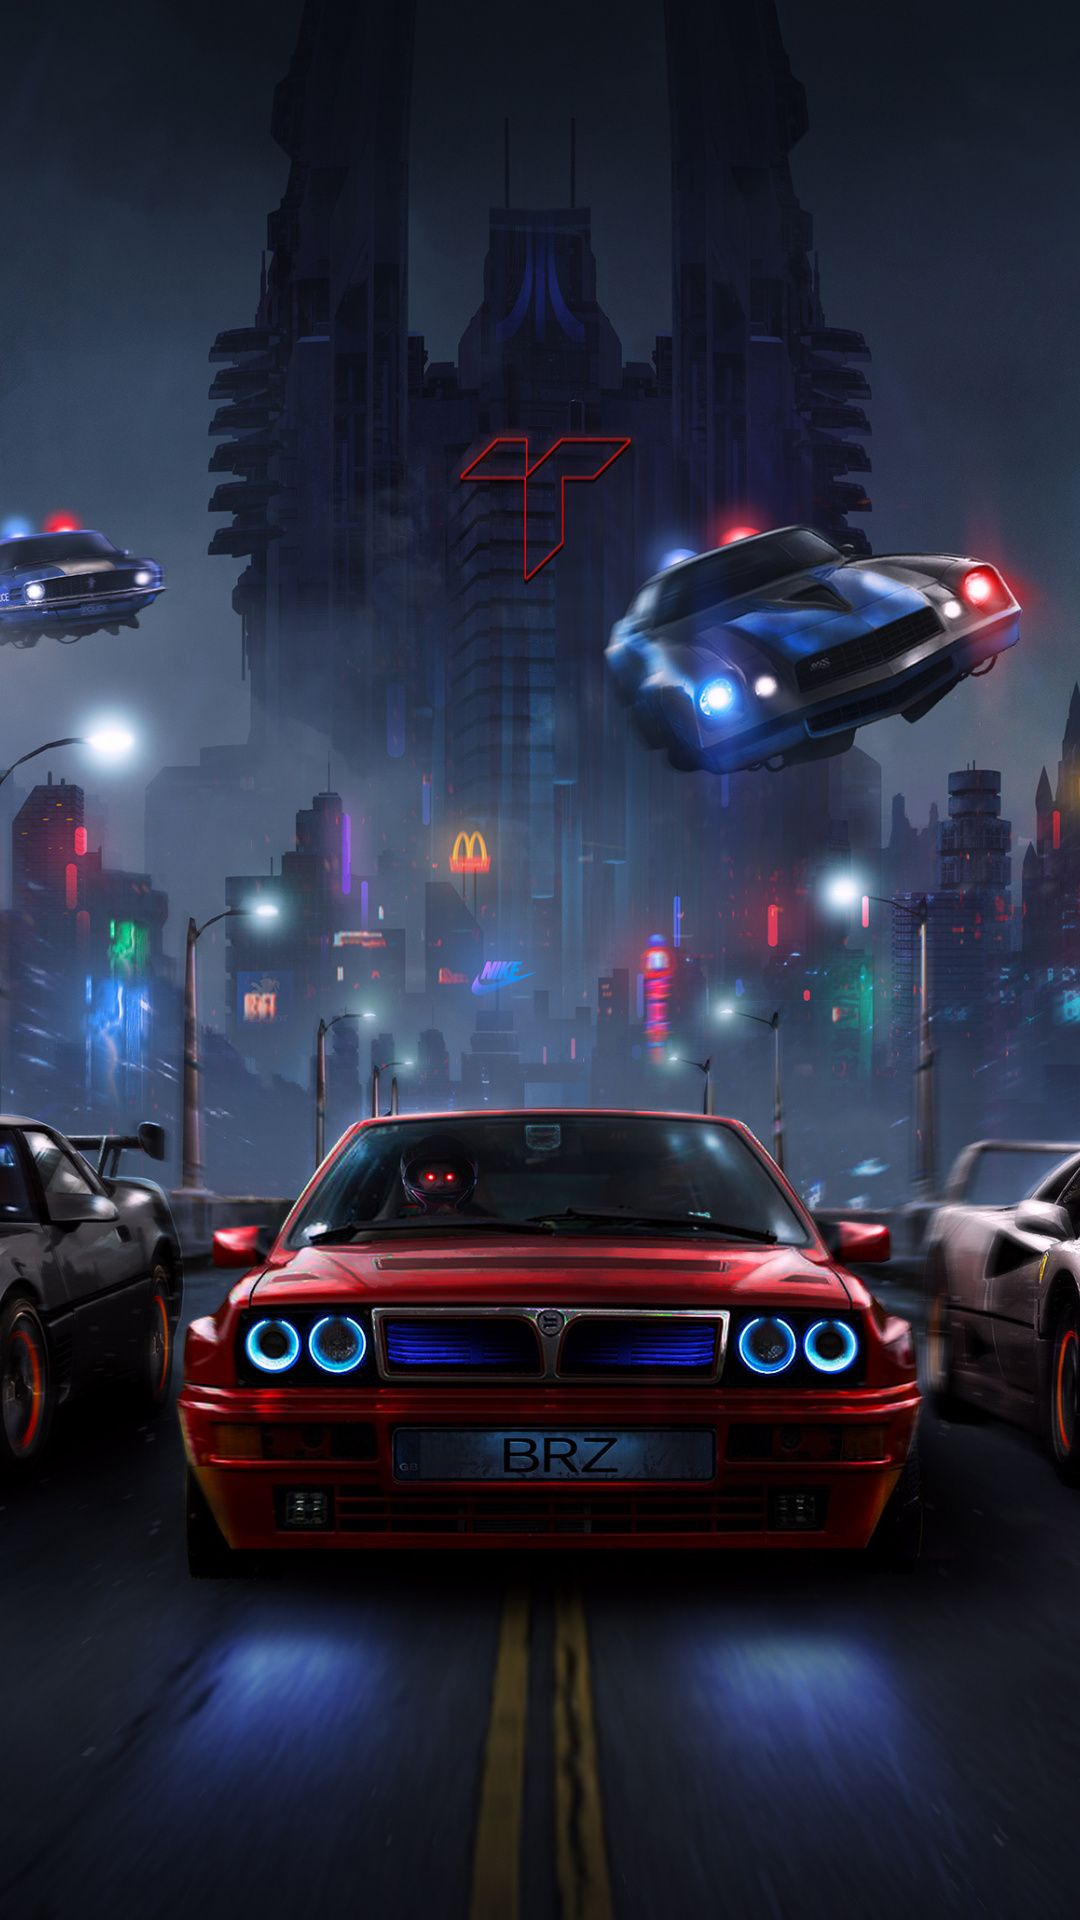 1080x1920 Racers night, chase, cars, wallpaper | Sports car wallpaper, Car wallpapers, Futuristic cars